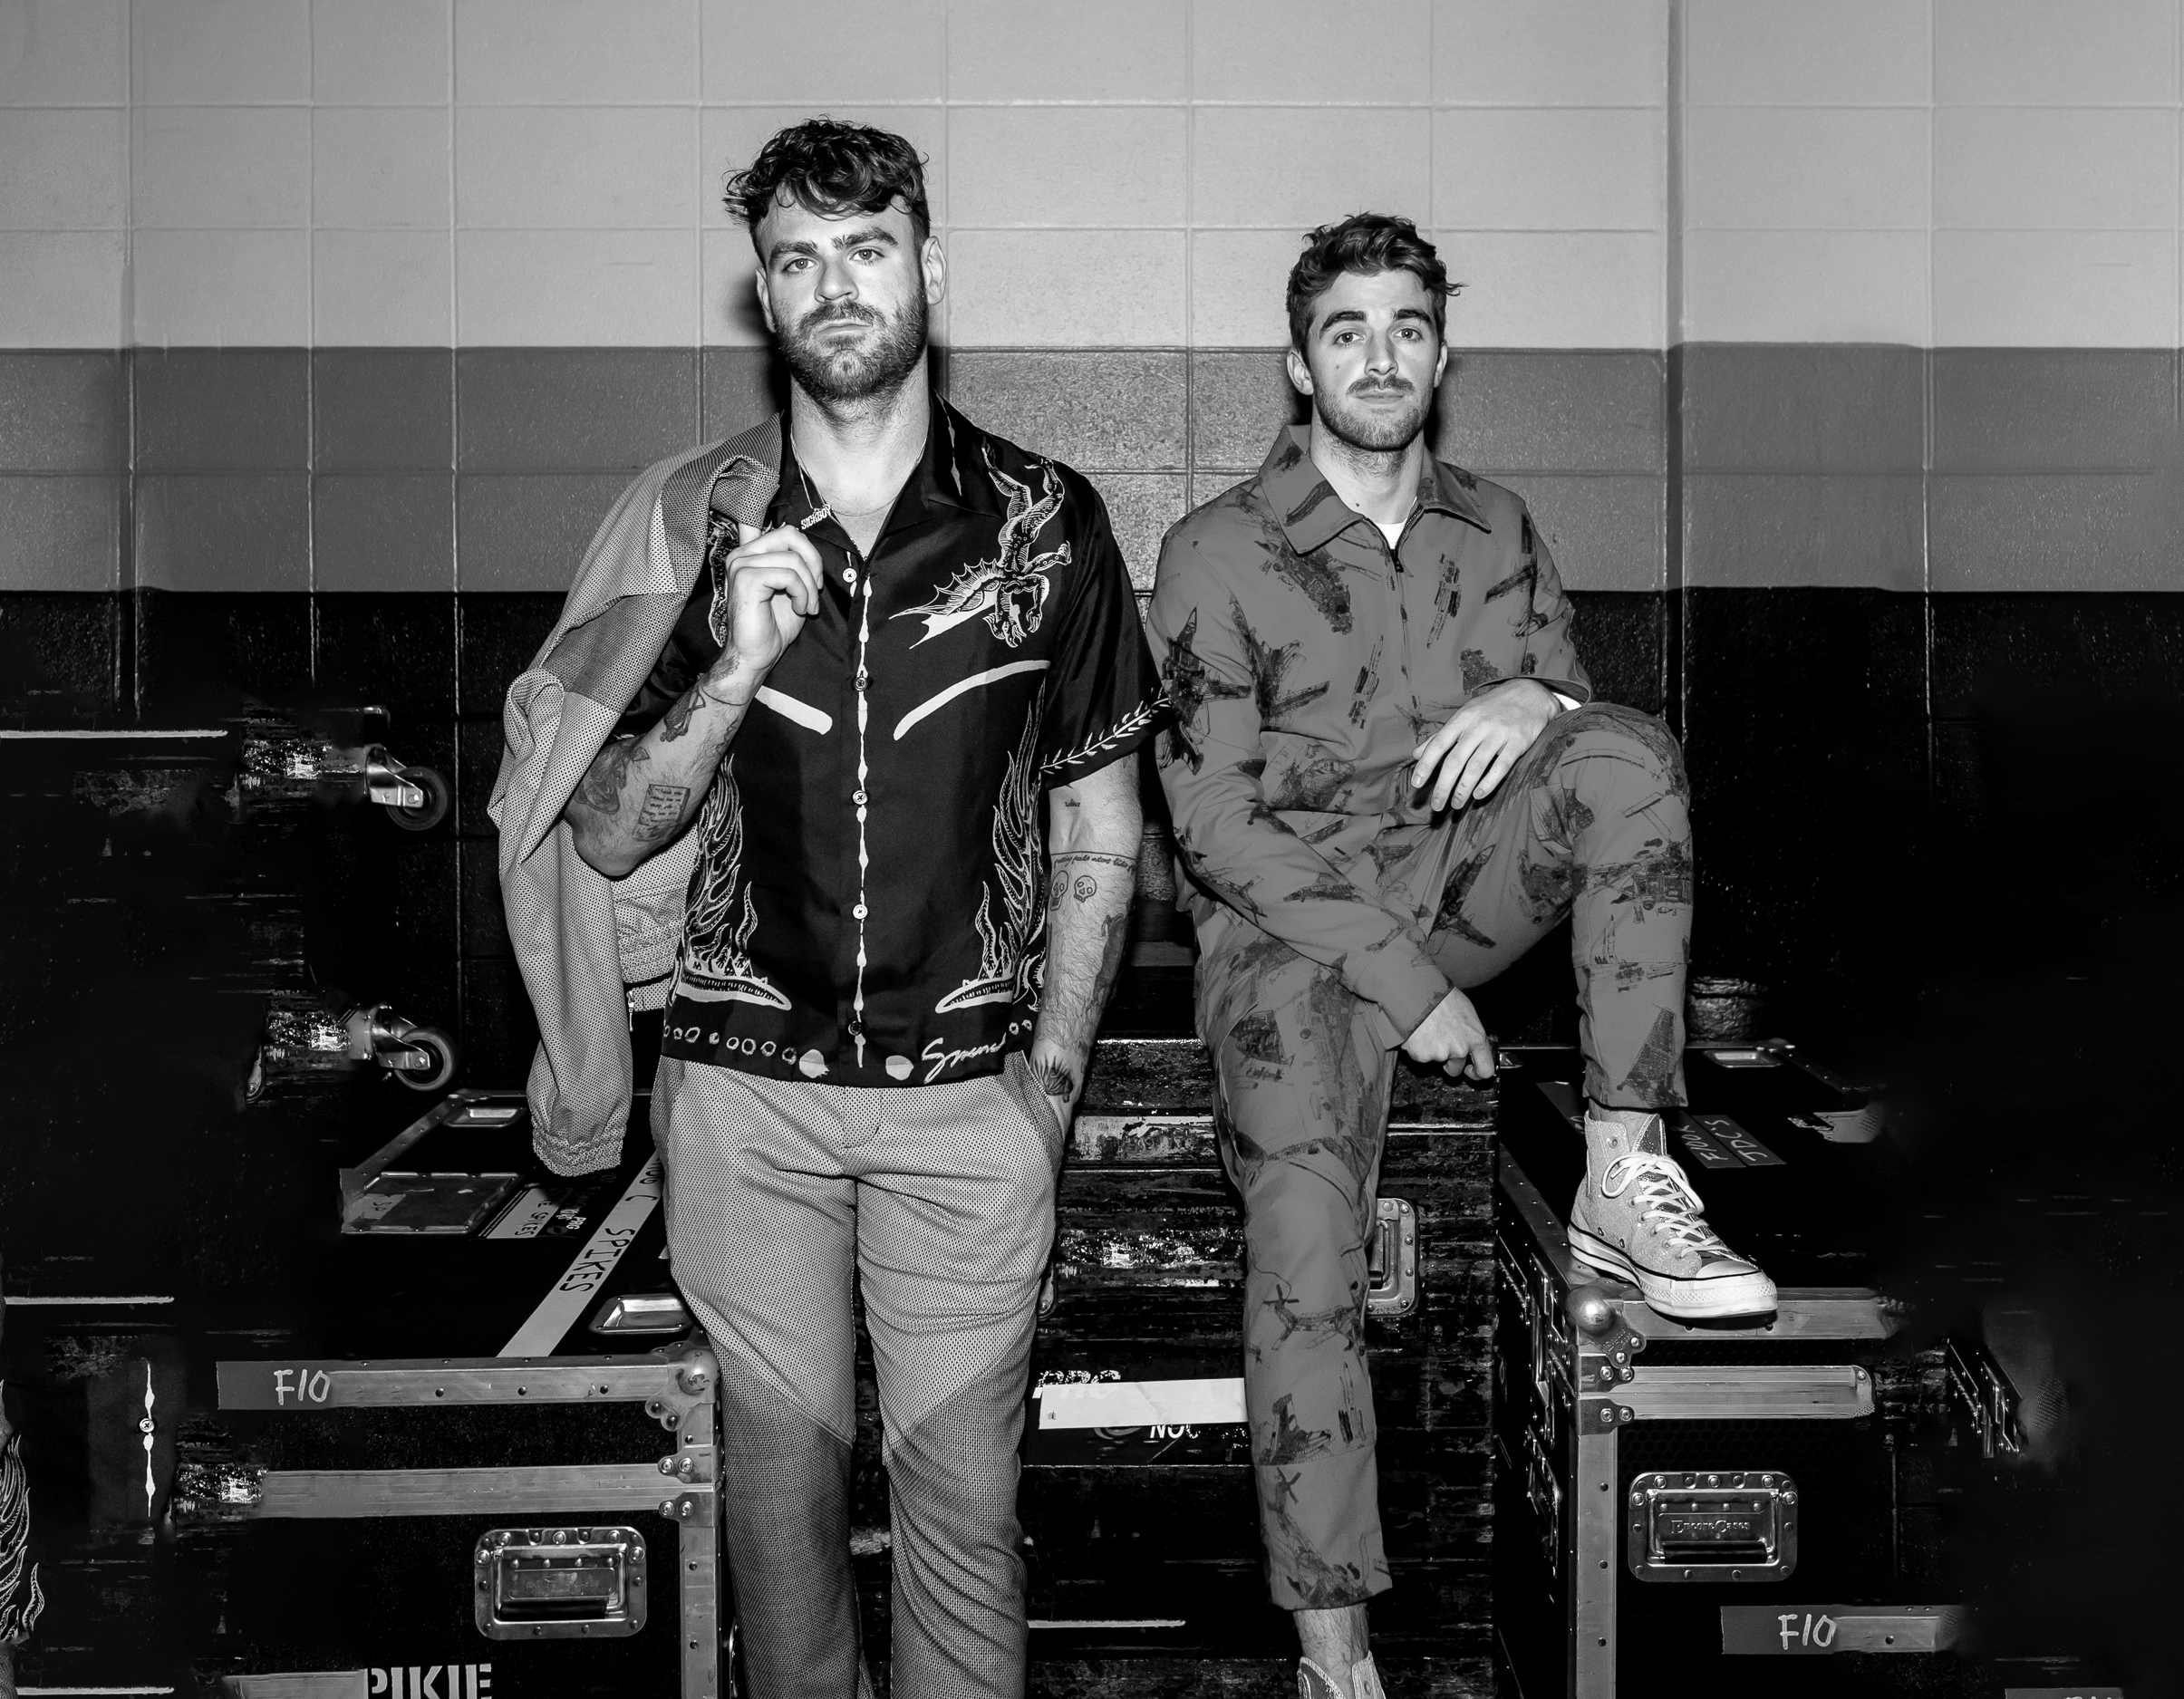 The Chainsmokers to headline Friday night concert at the RBC Canadian Open.